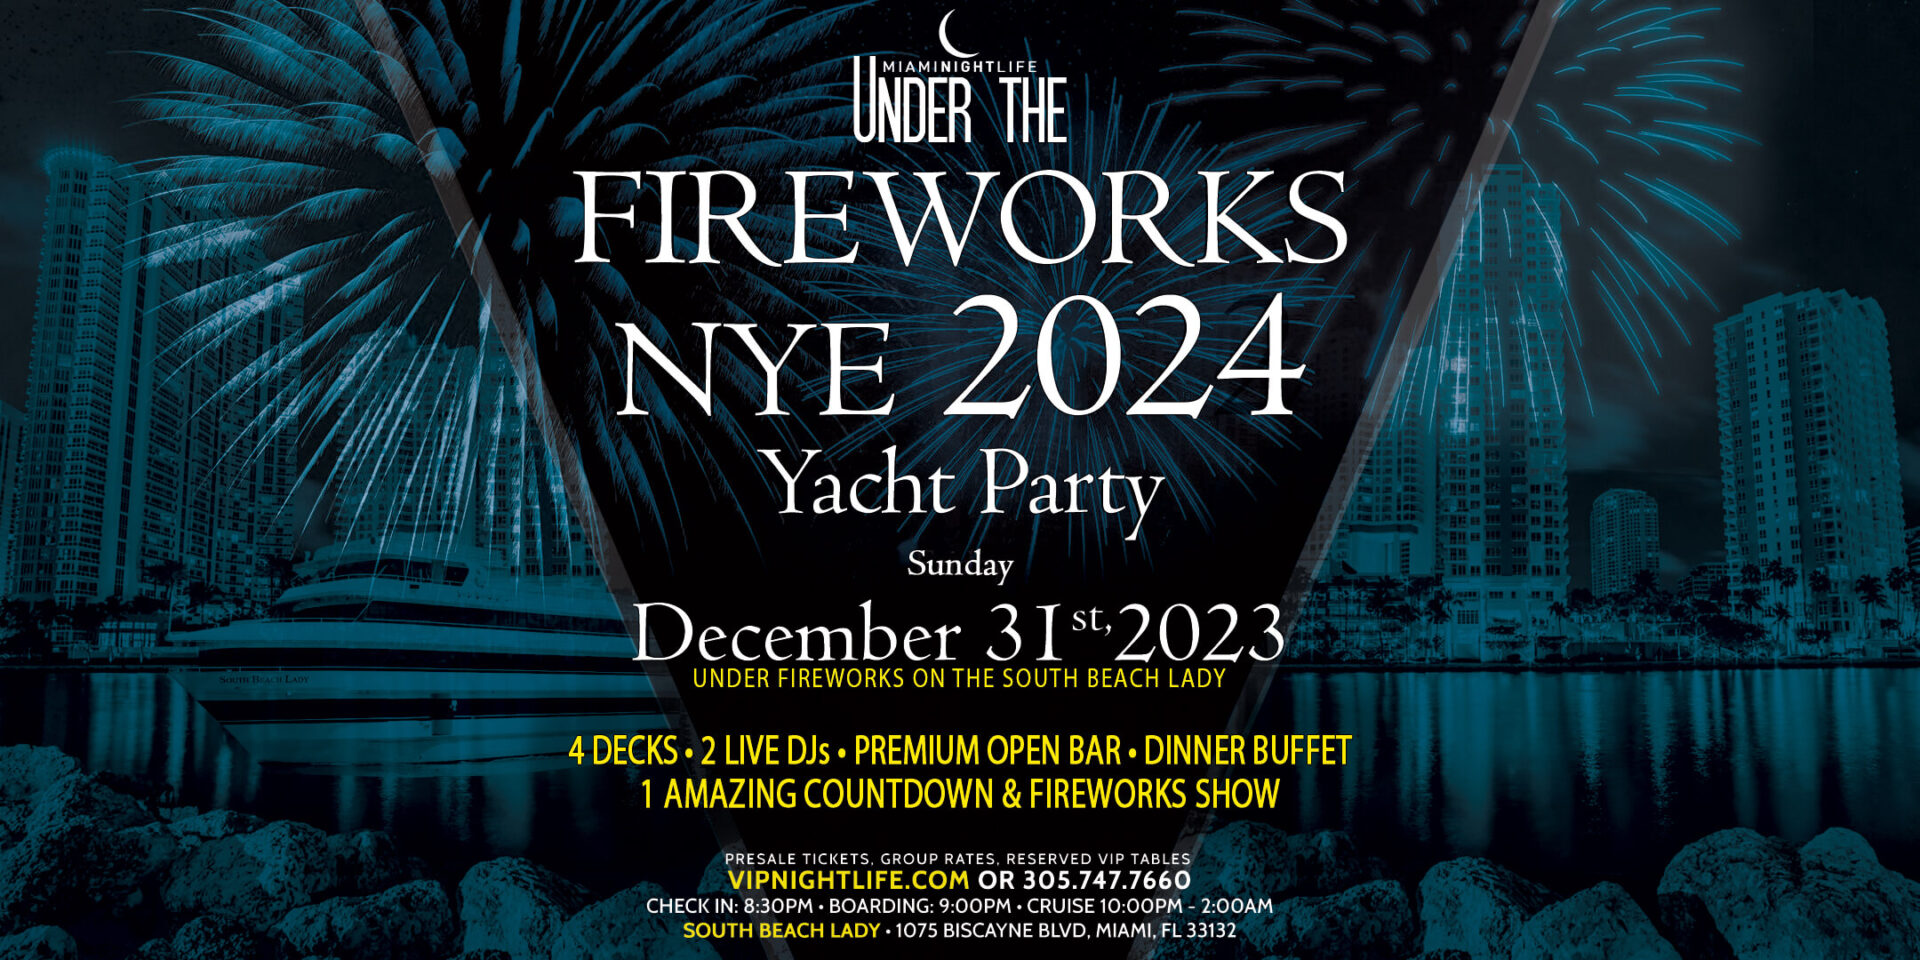 Miami Under the Fireworks Yacht Party New Year's Eve 2024 - VIP Nightlife